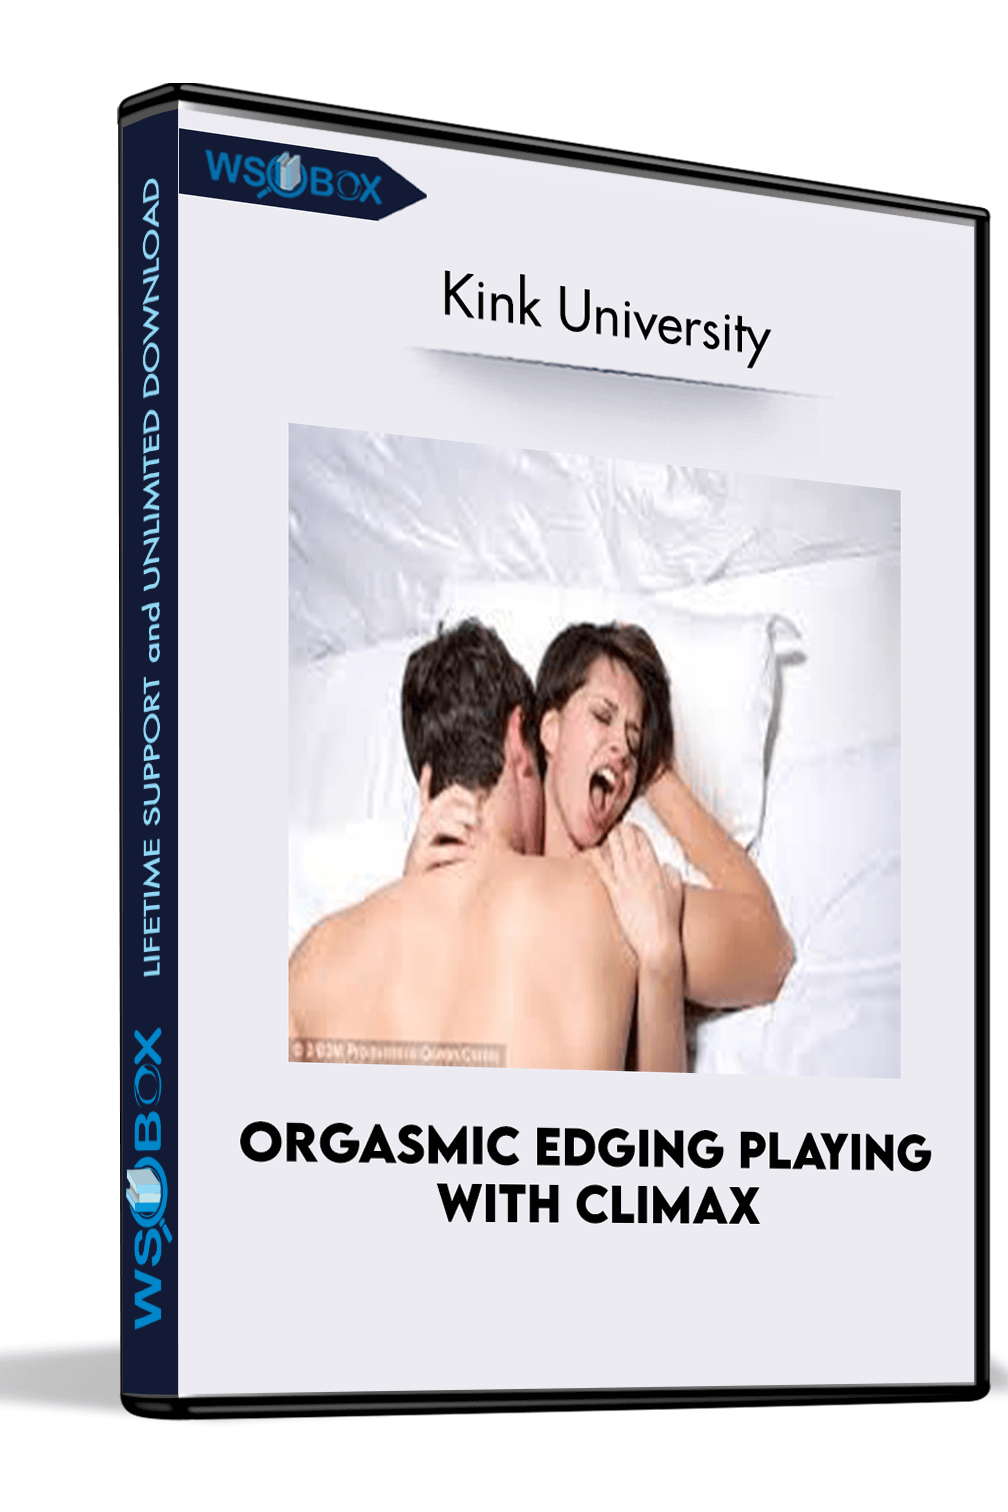 orgasmic-edging-playing-with-climax-kink-university